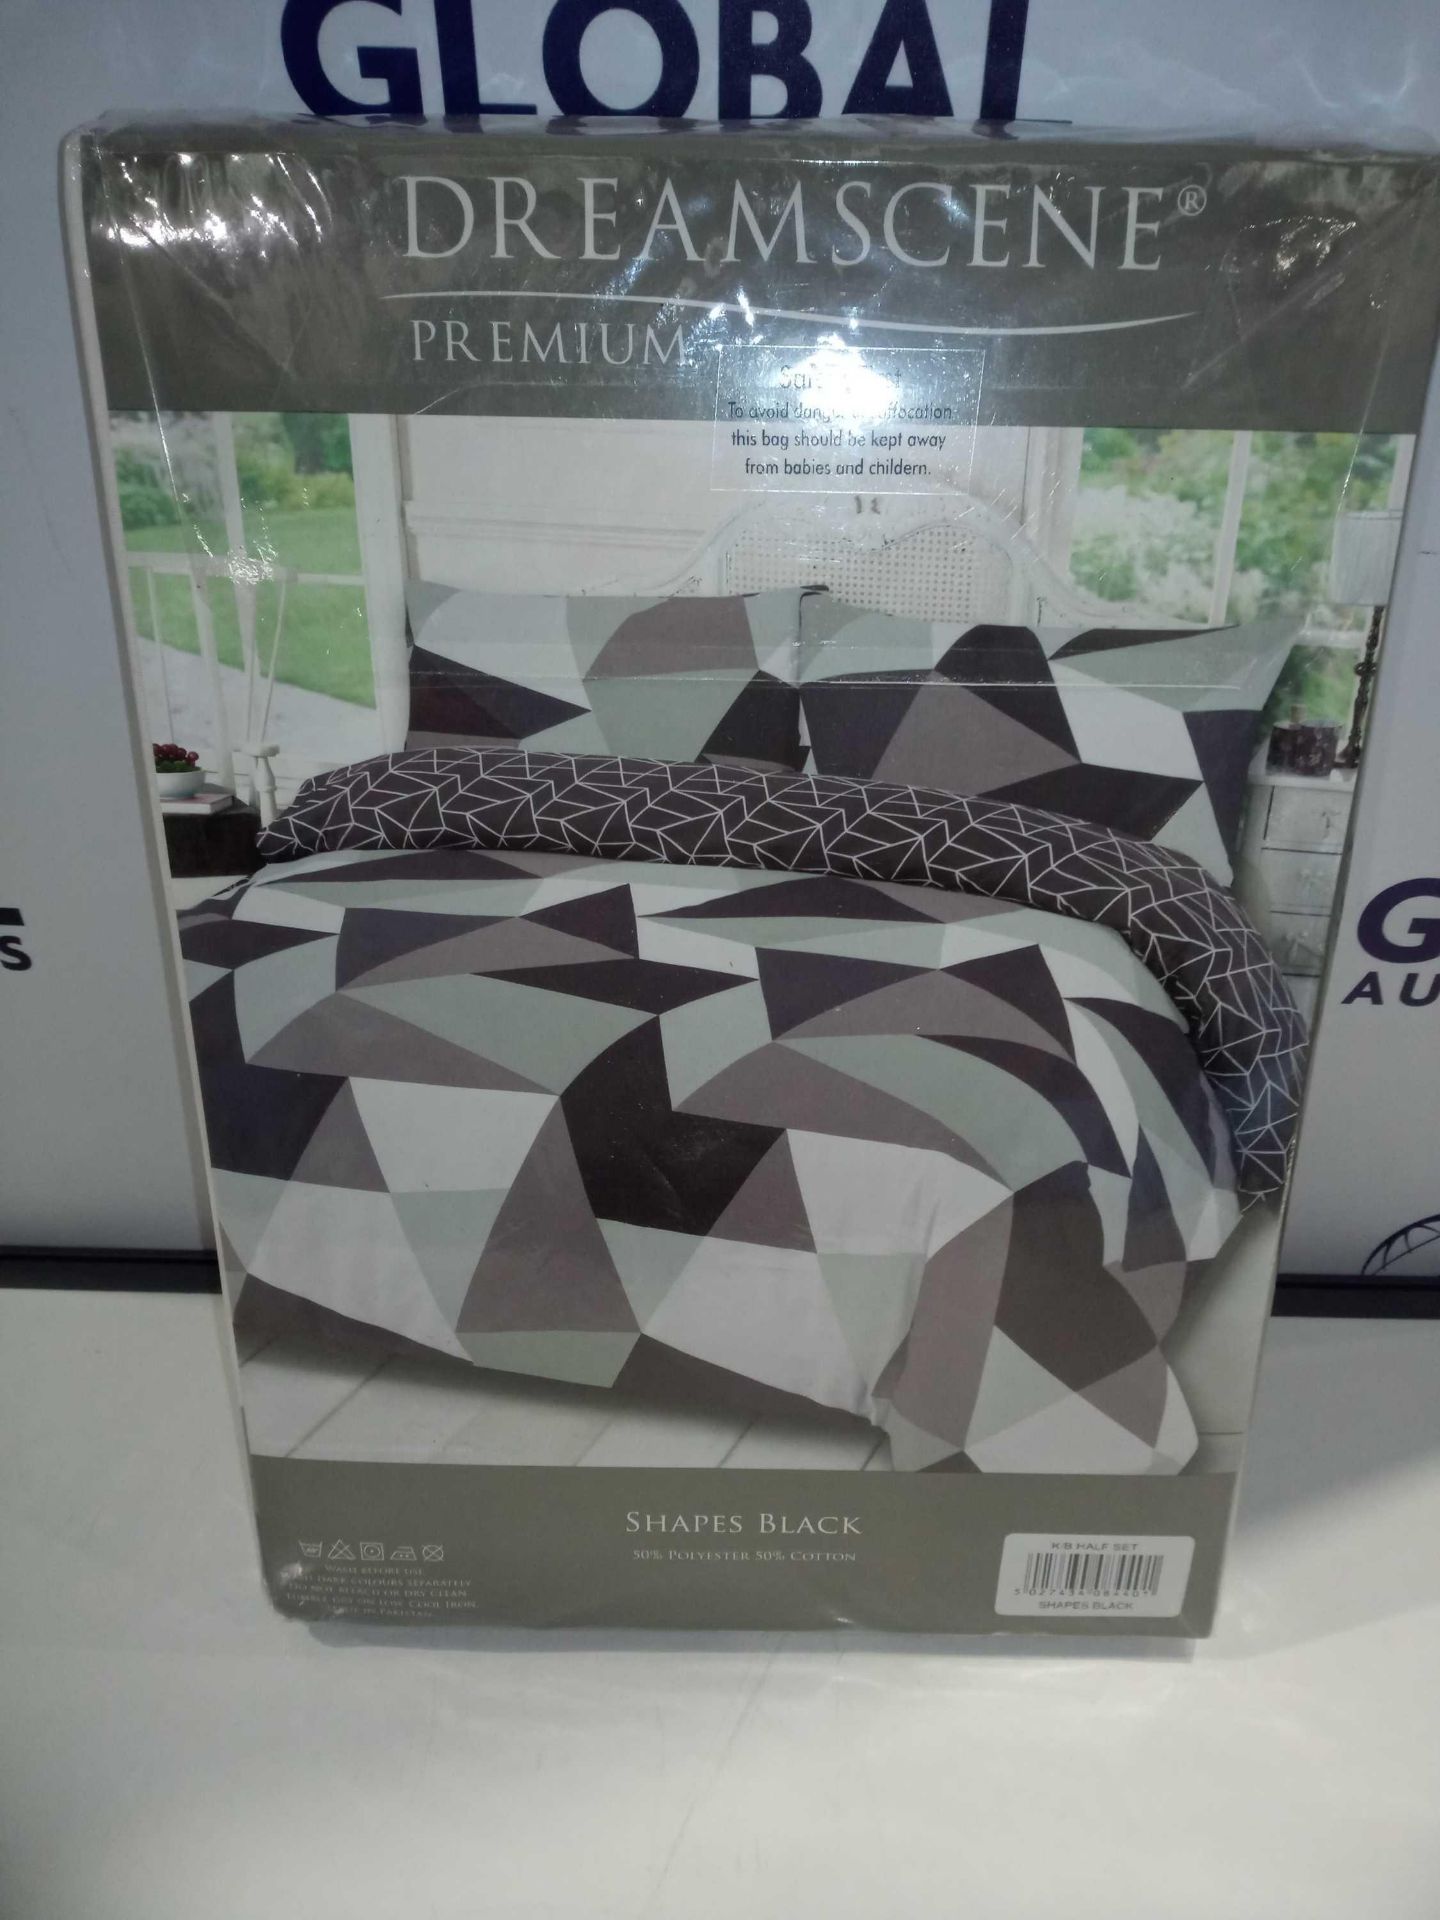 RRP £60 To £65 Each Bagged Assorted King-Size Duvet Cover Sets By Dreamscene Premium - Image 2 of 2